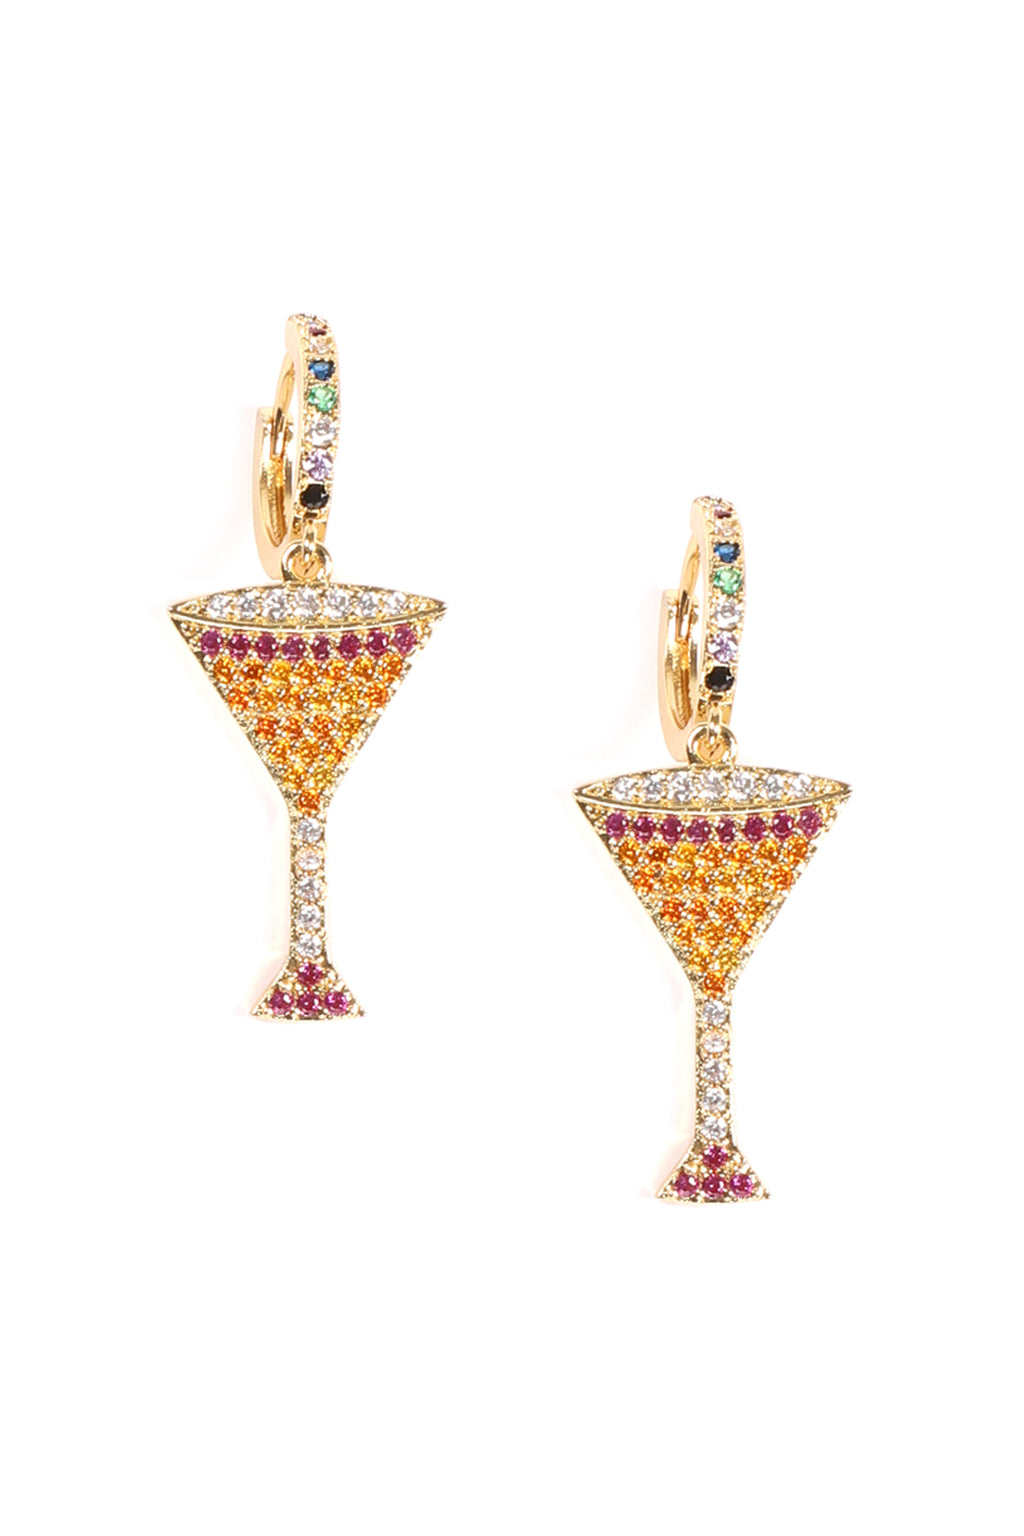 18k gold plated huggie earrings with martini pendants.